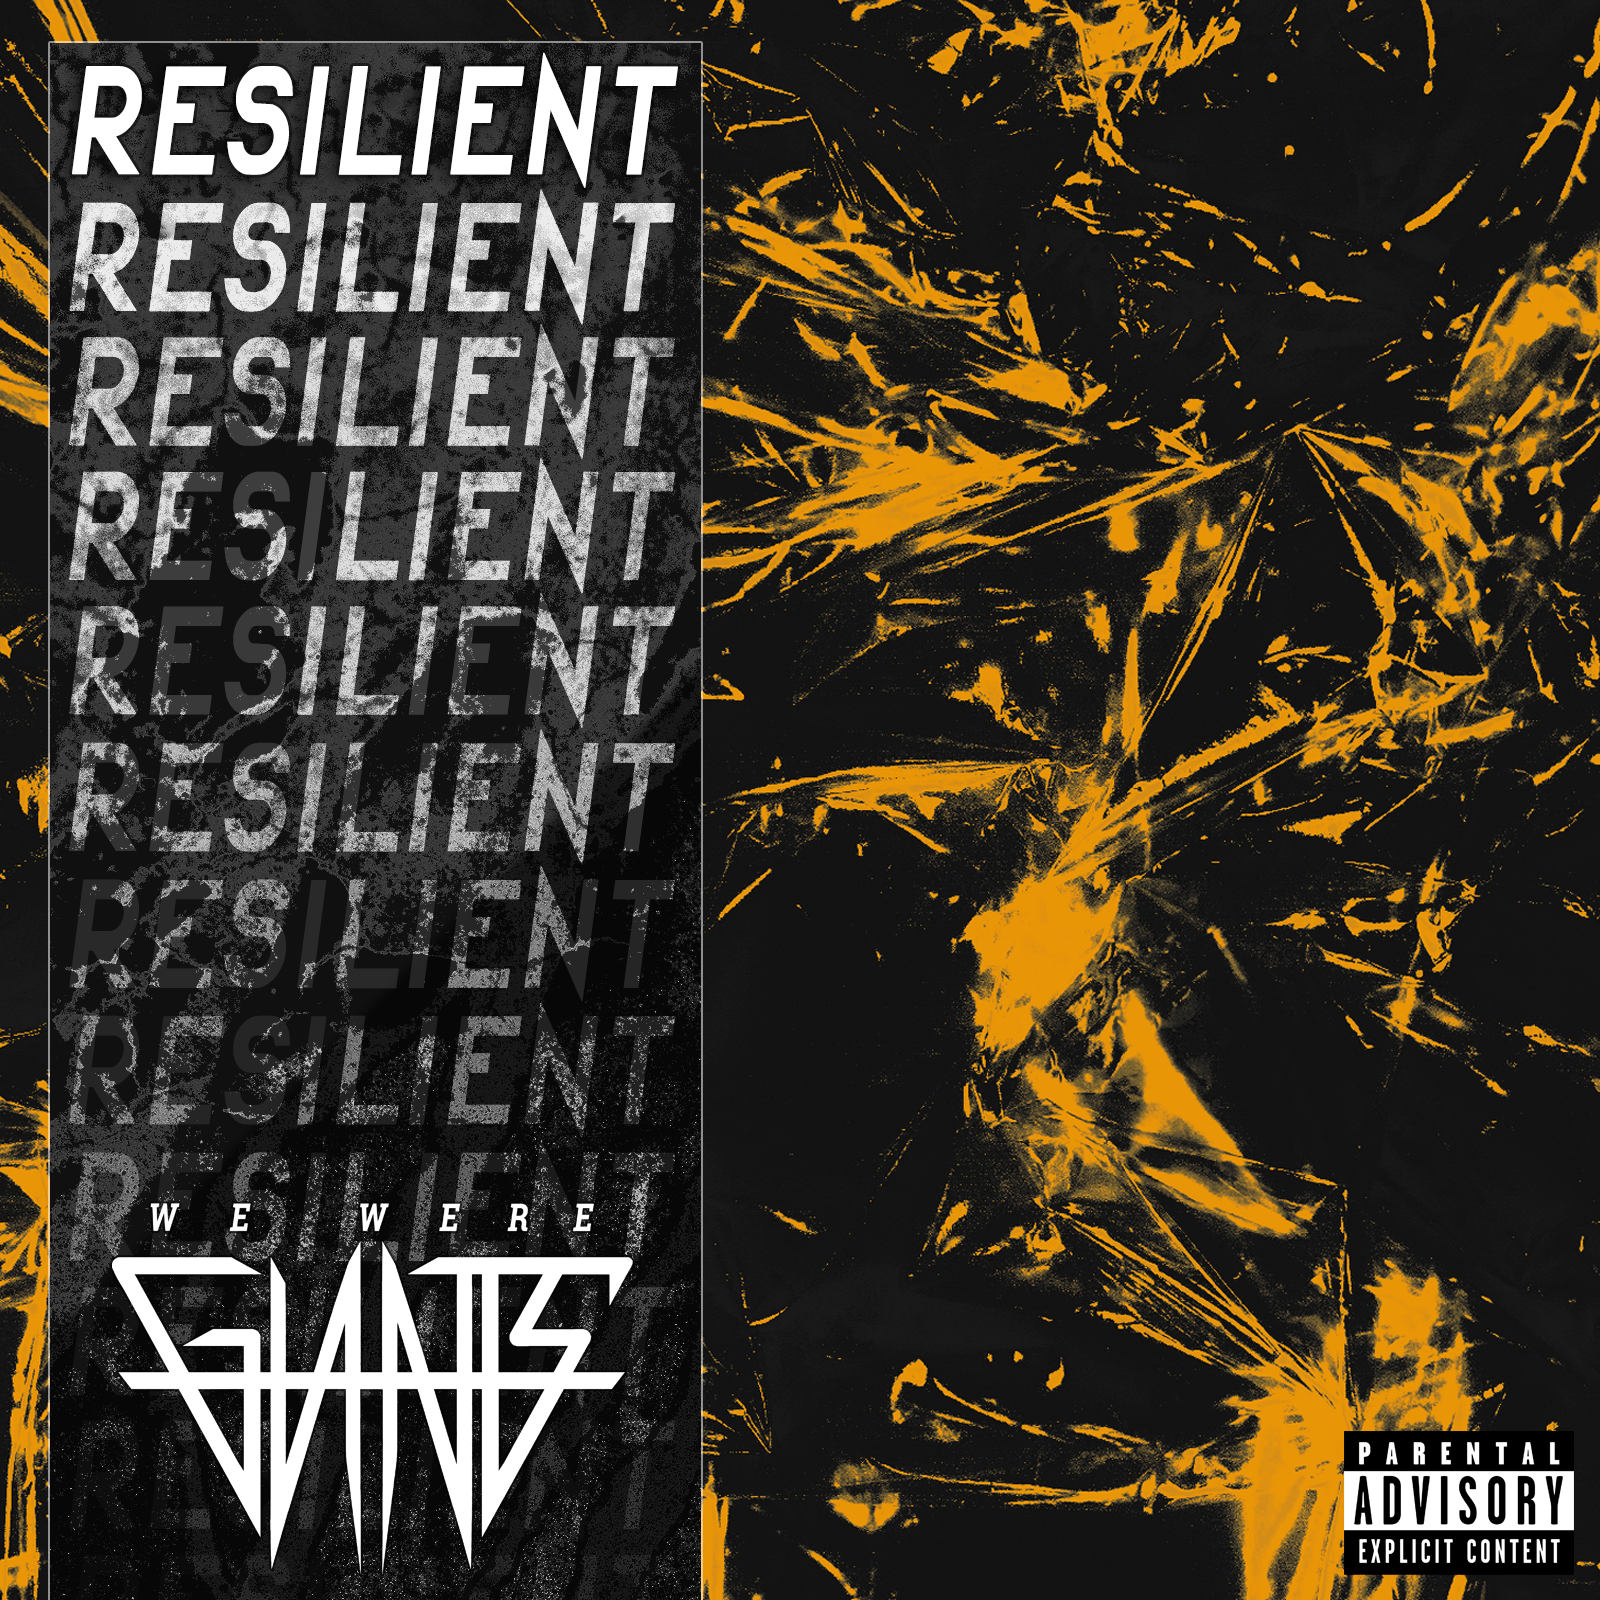 We Were Giants - Resilient